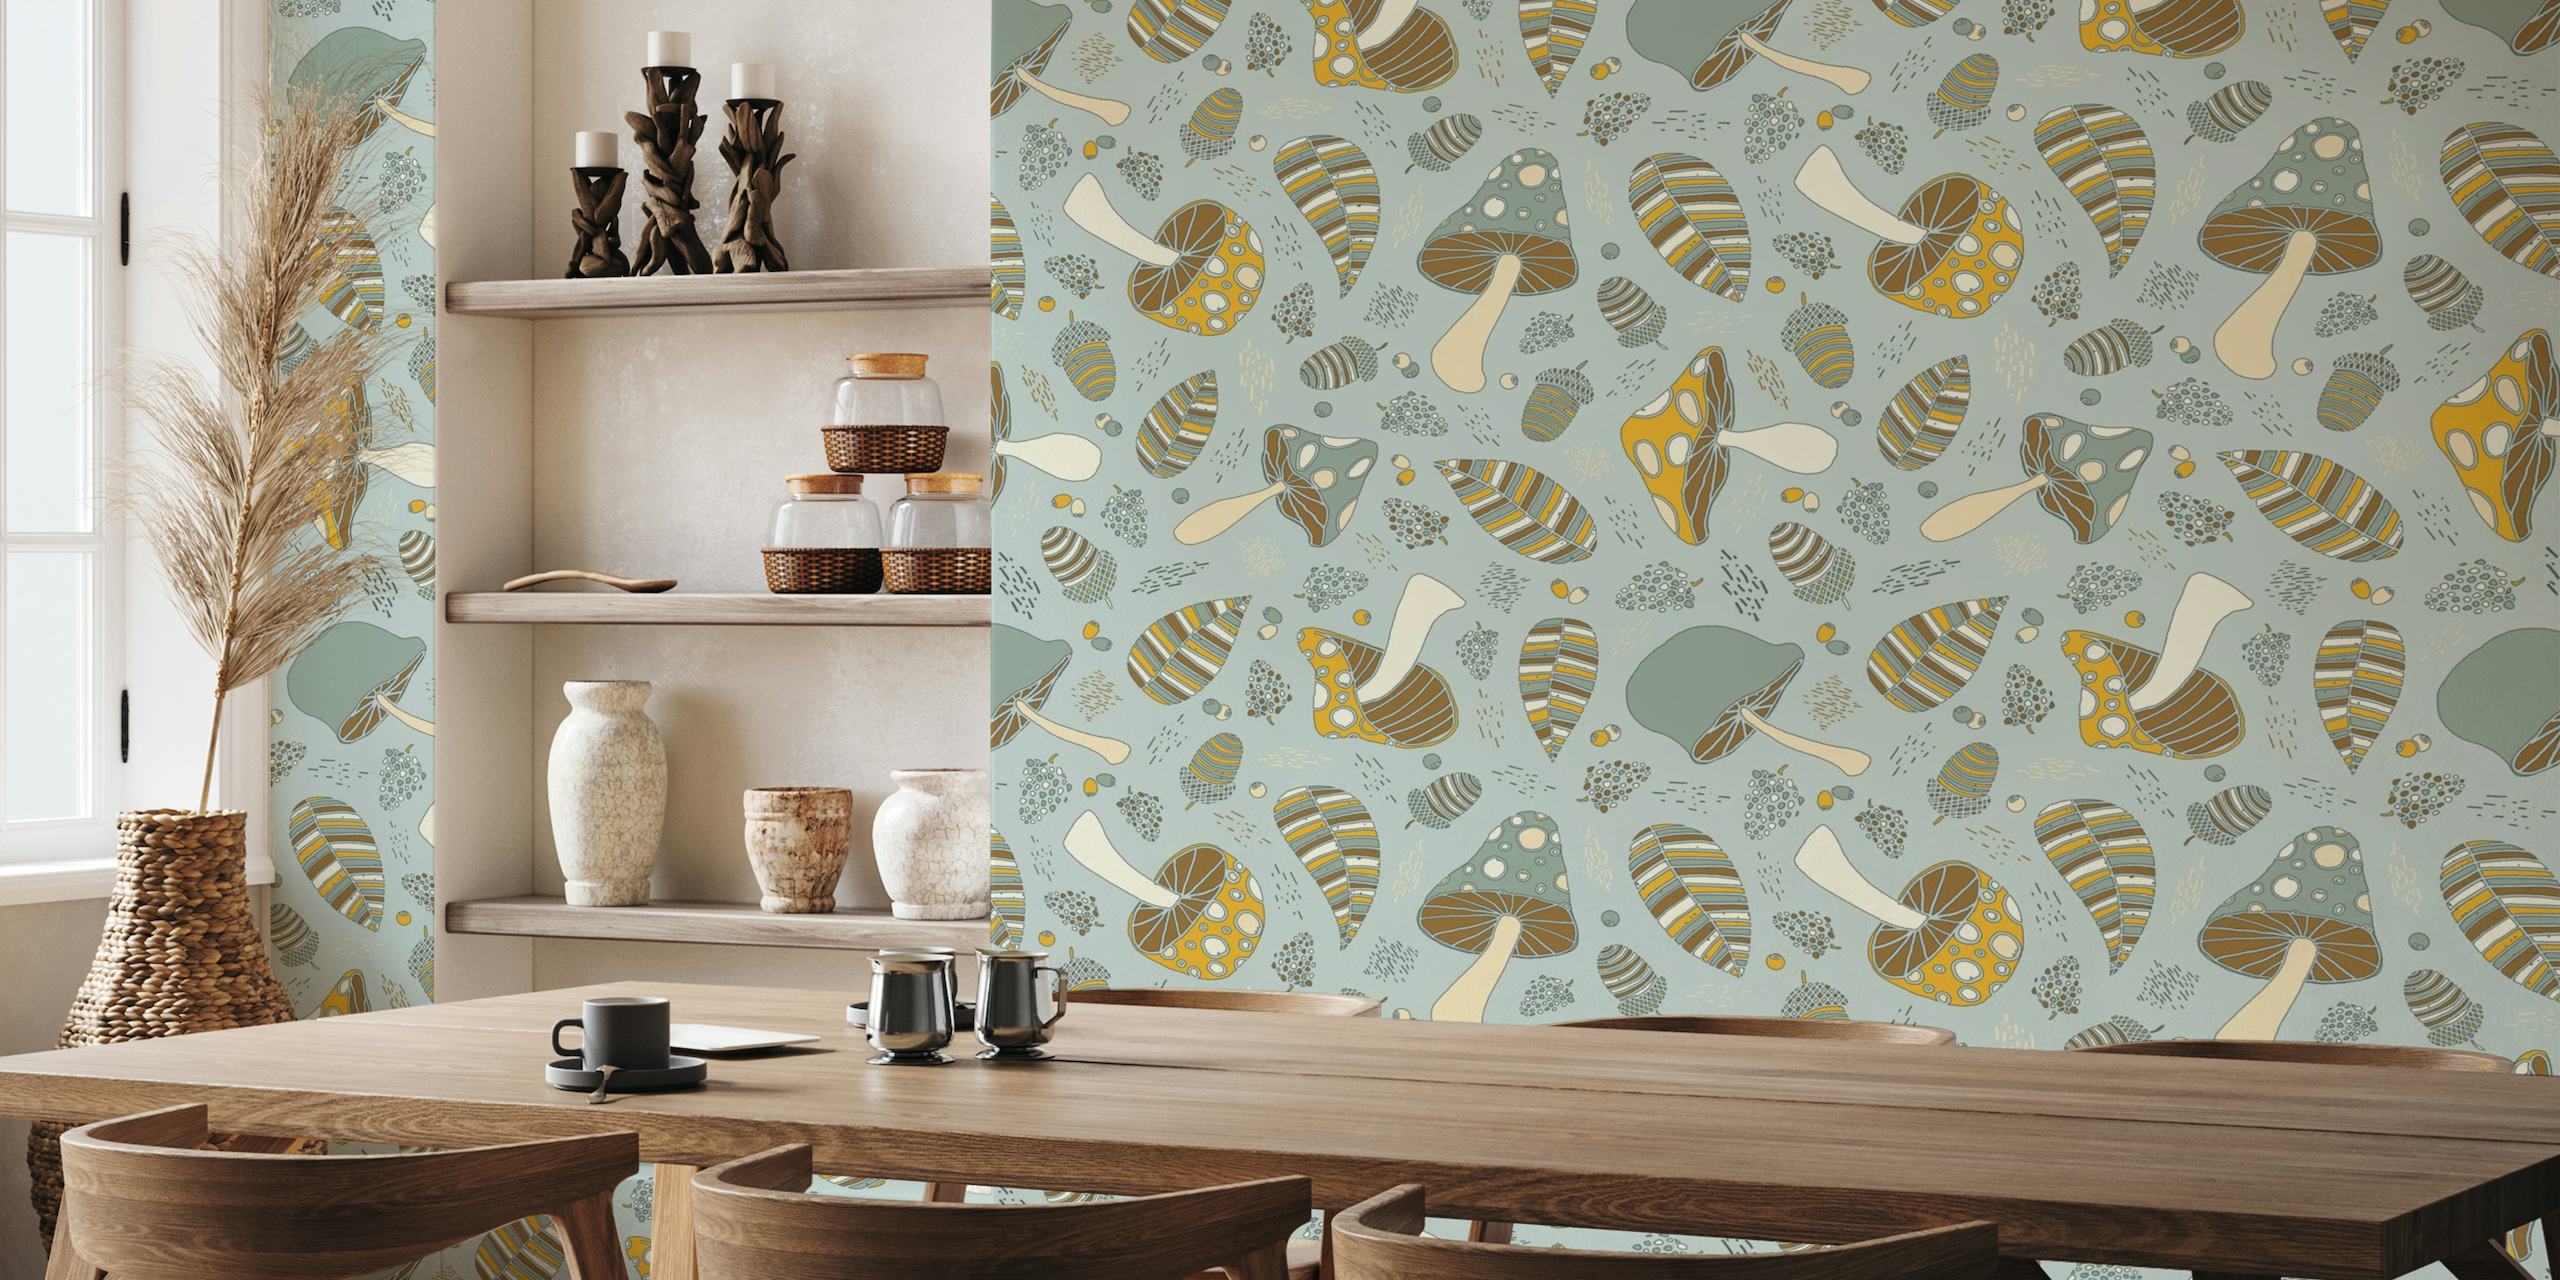 Autumnal fruits and mushrooms soft blue wallpaper